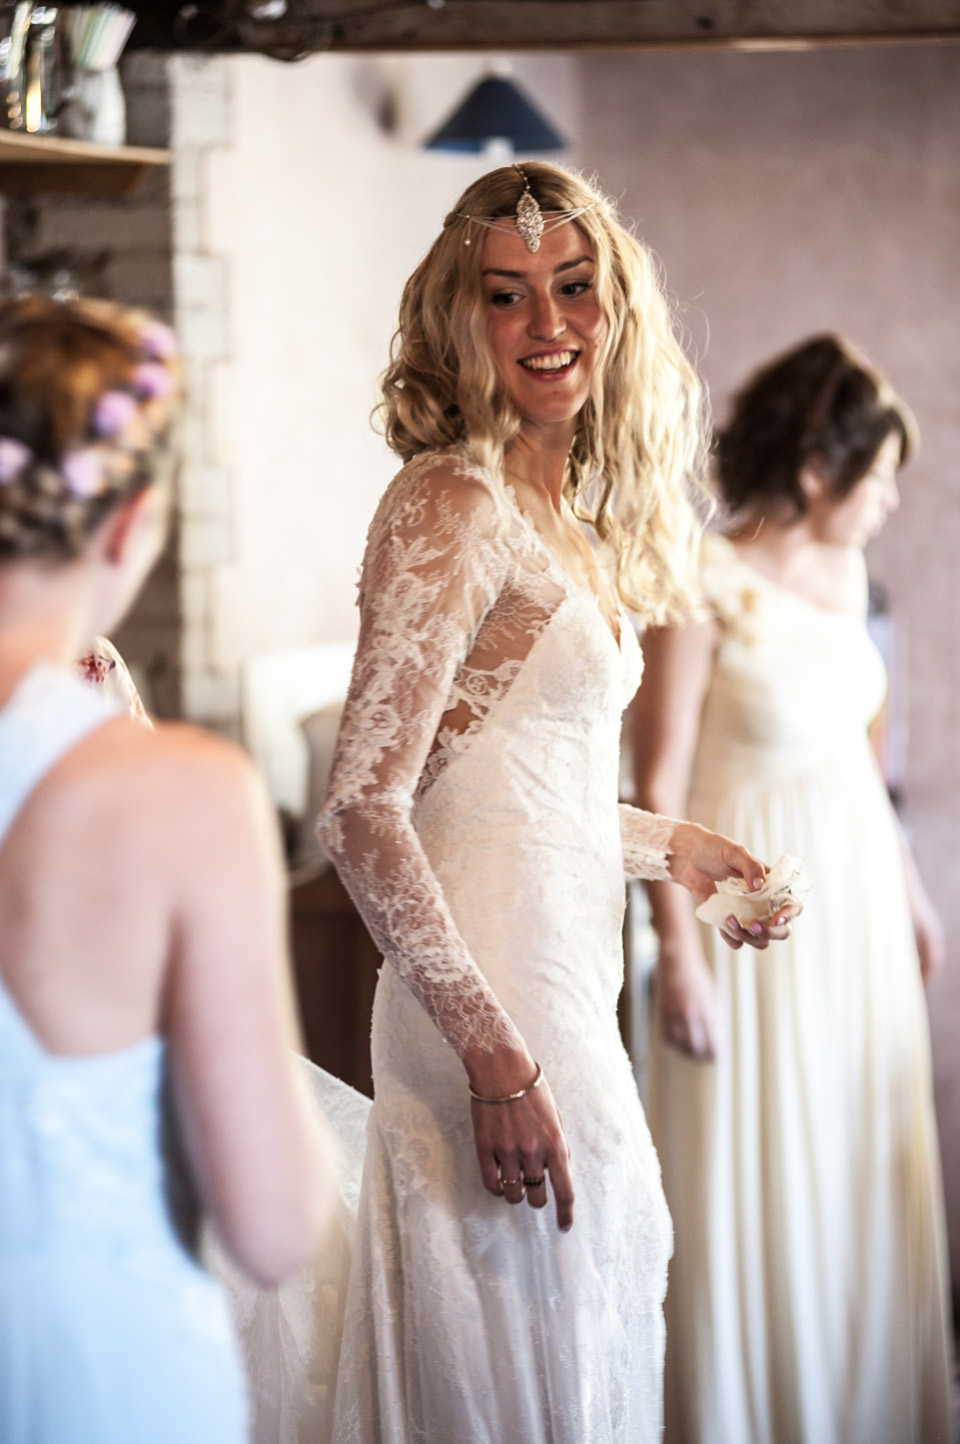 An Elegant, Backless Lace Dress for a Cornish Seaside and Surf Wedding ...